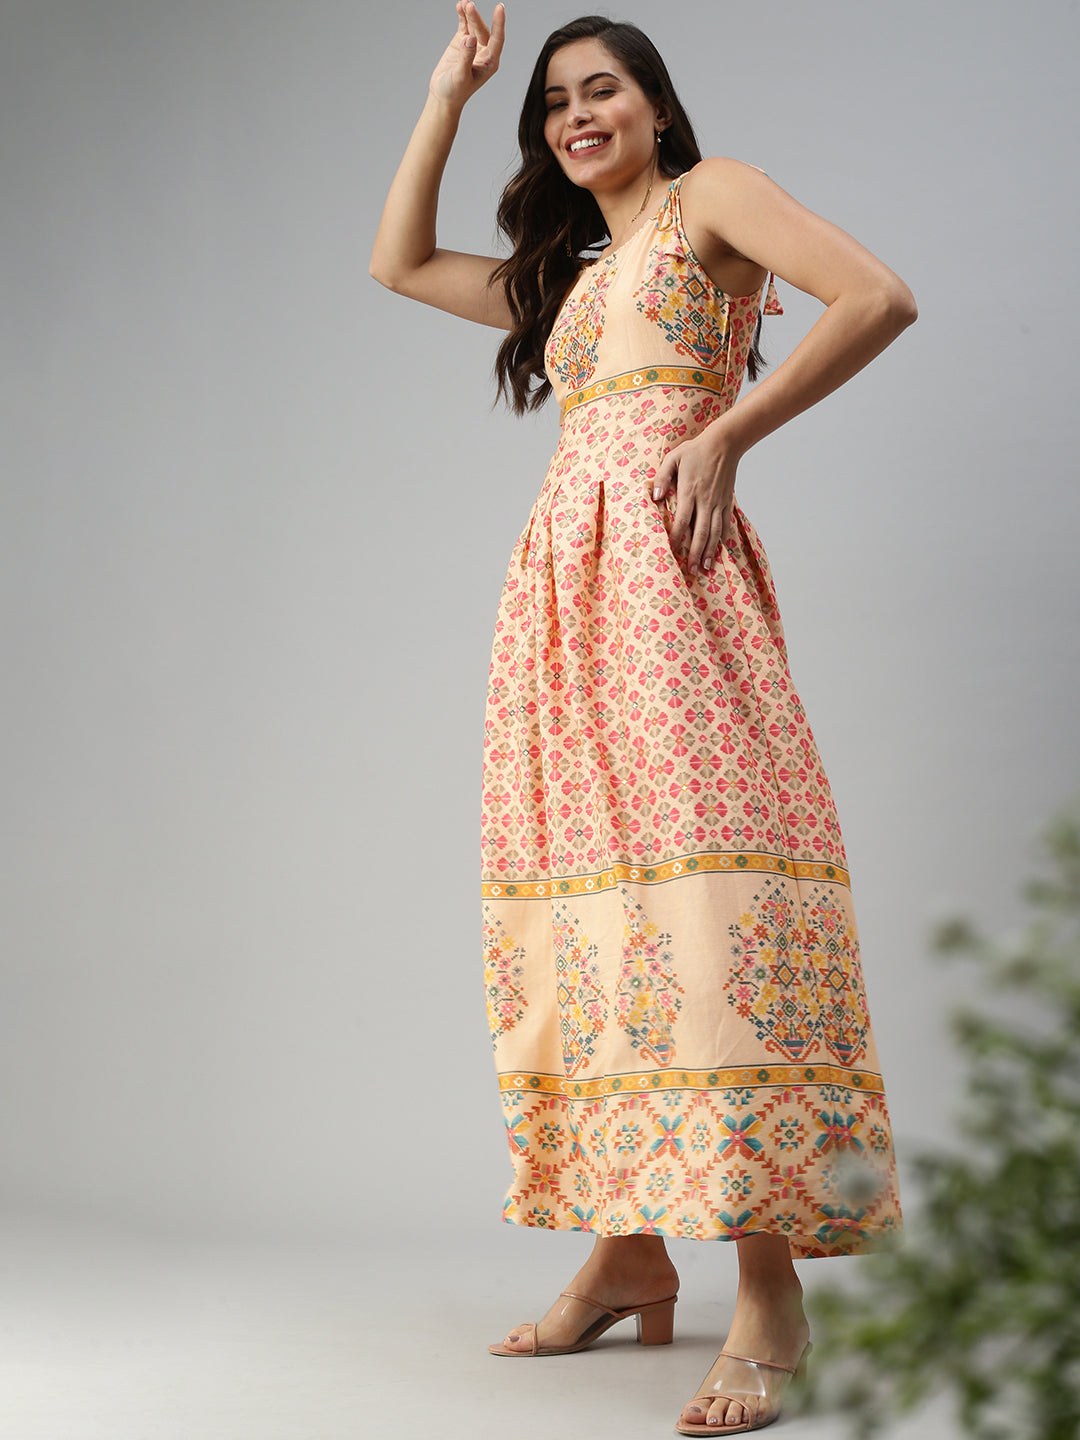 Women's Ethnic Motifs Peach Fit and Flare Dress